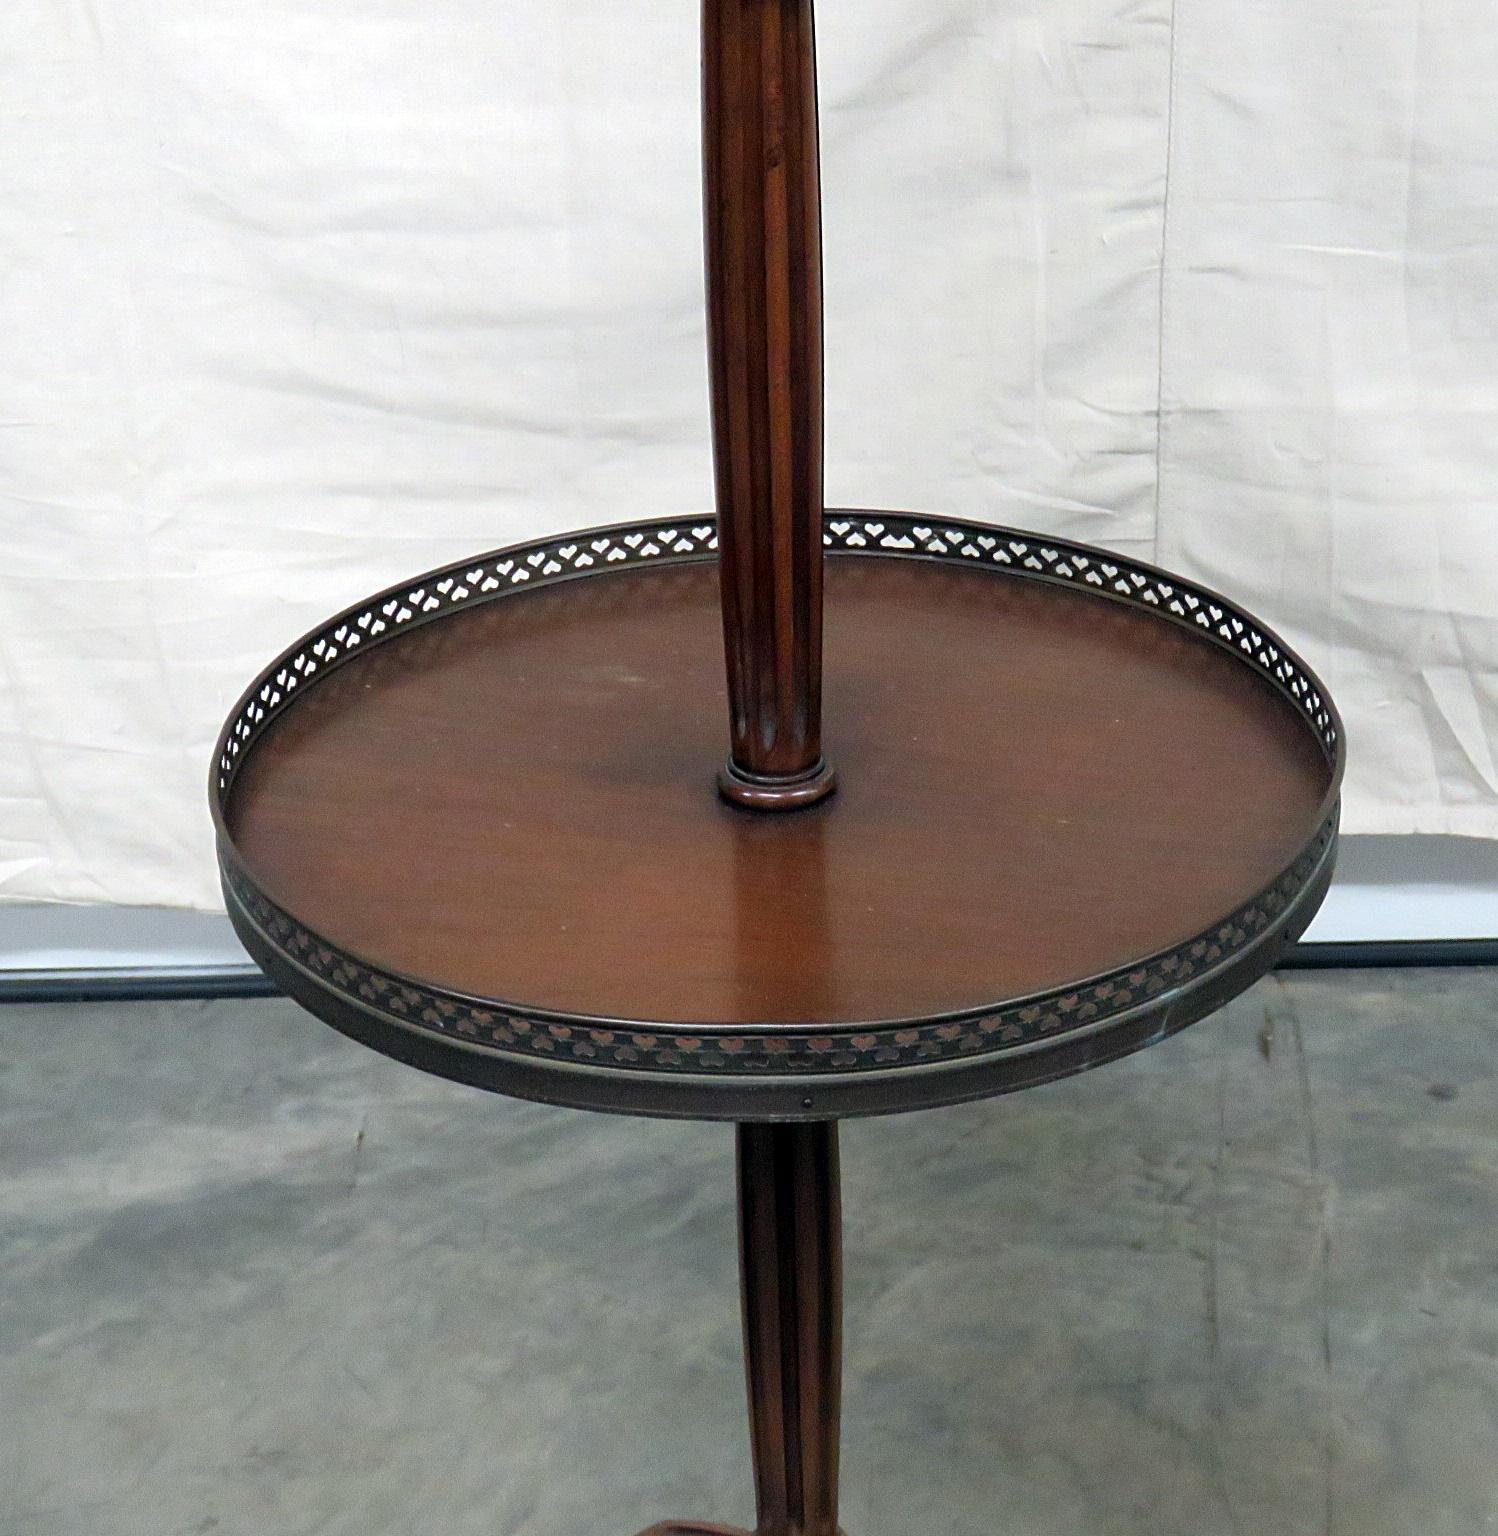 vintage table with lamp attached